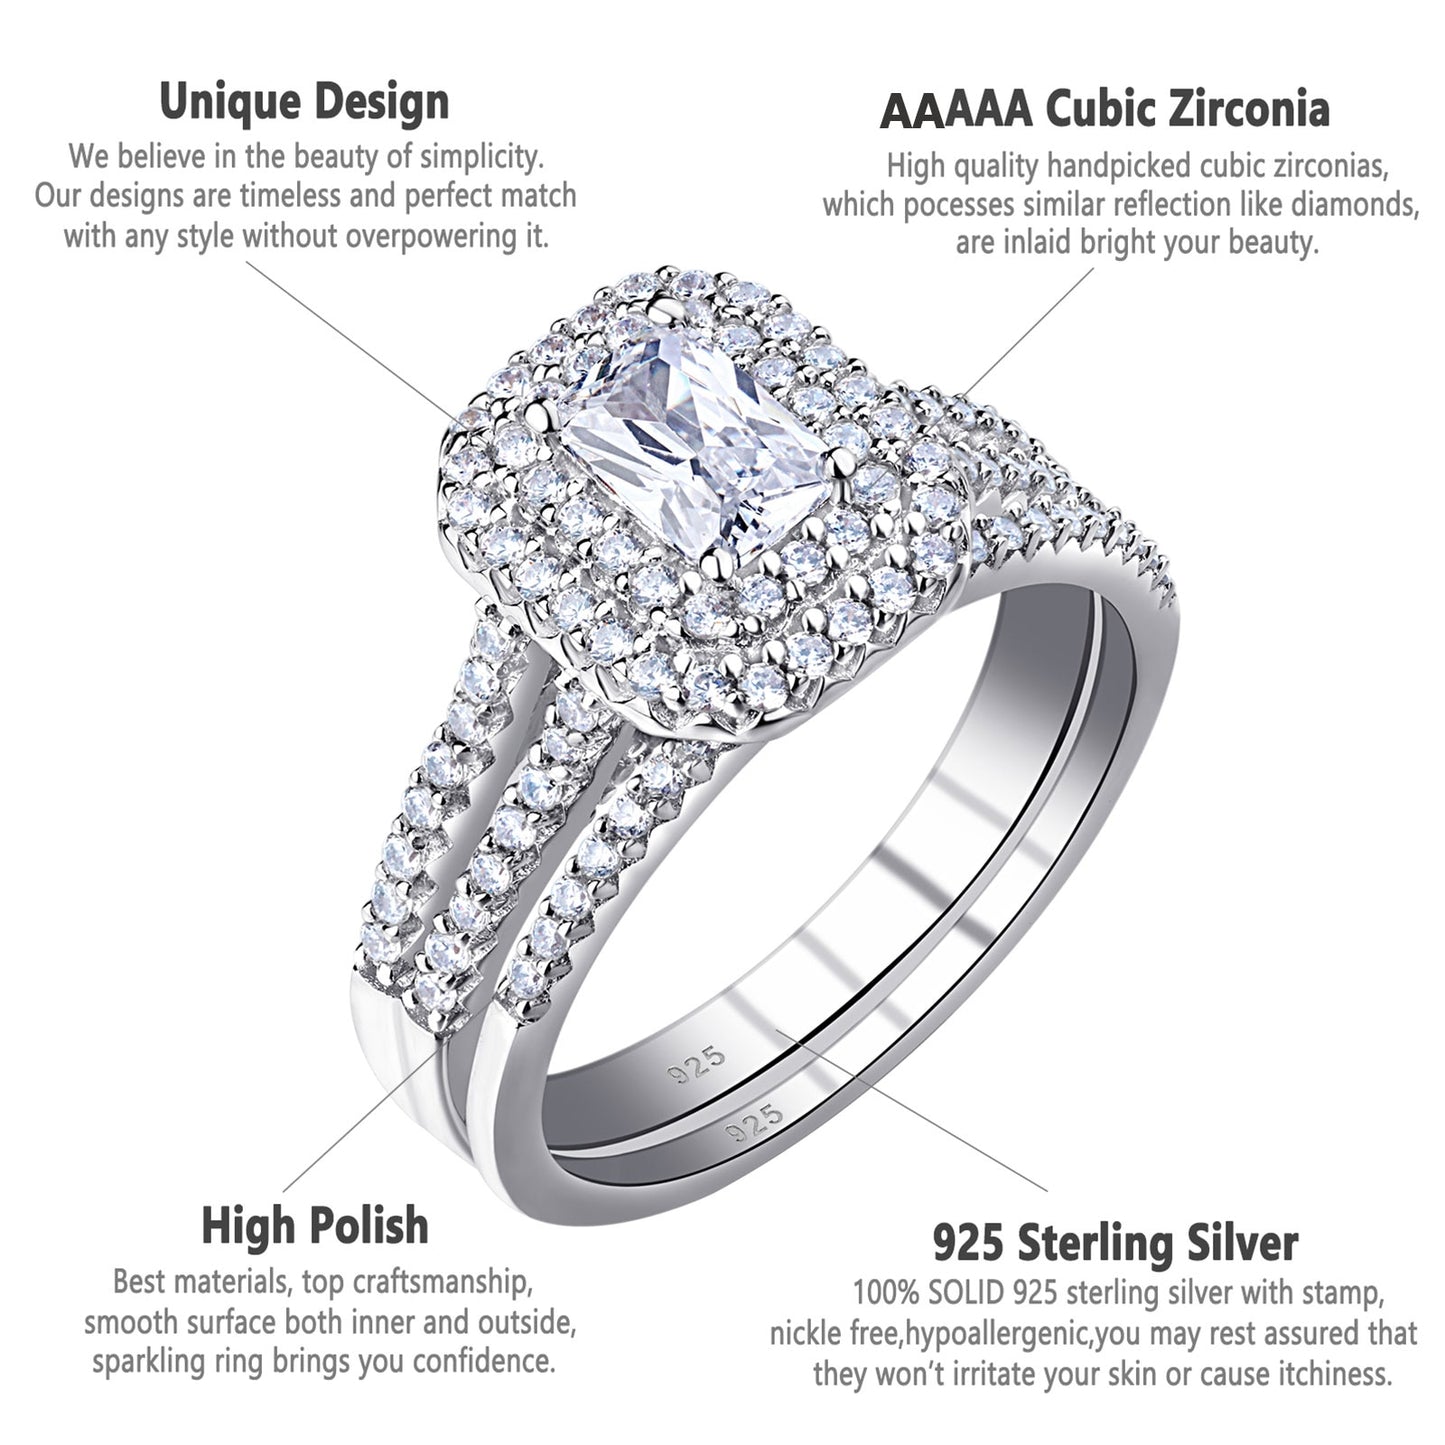 Solid 925 Silver Wedding Jewelry Double Halo Radiant Cut Engagement Bridal Rings for Women White AAAAA Cubic Zirconia